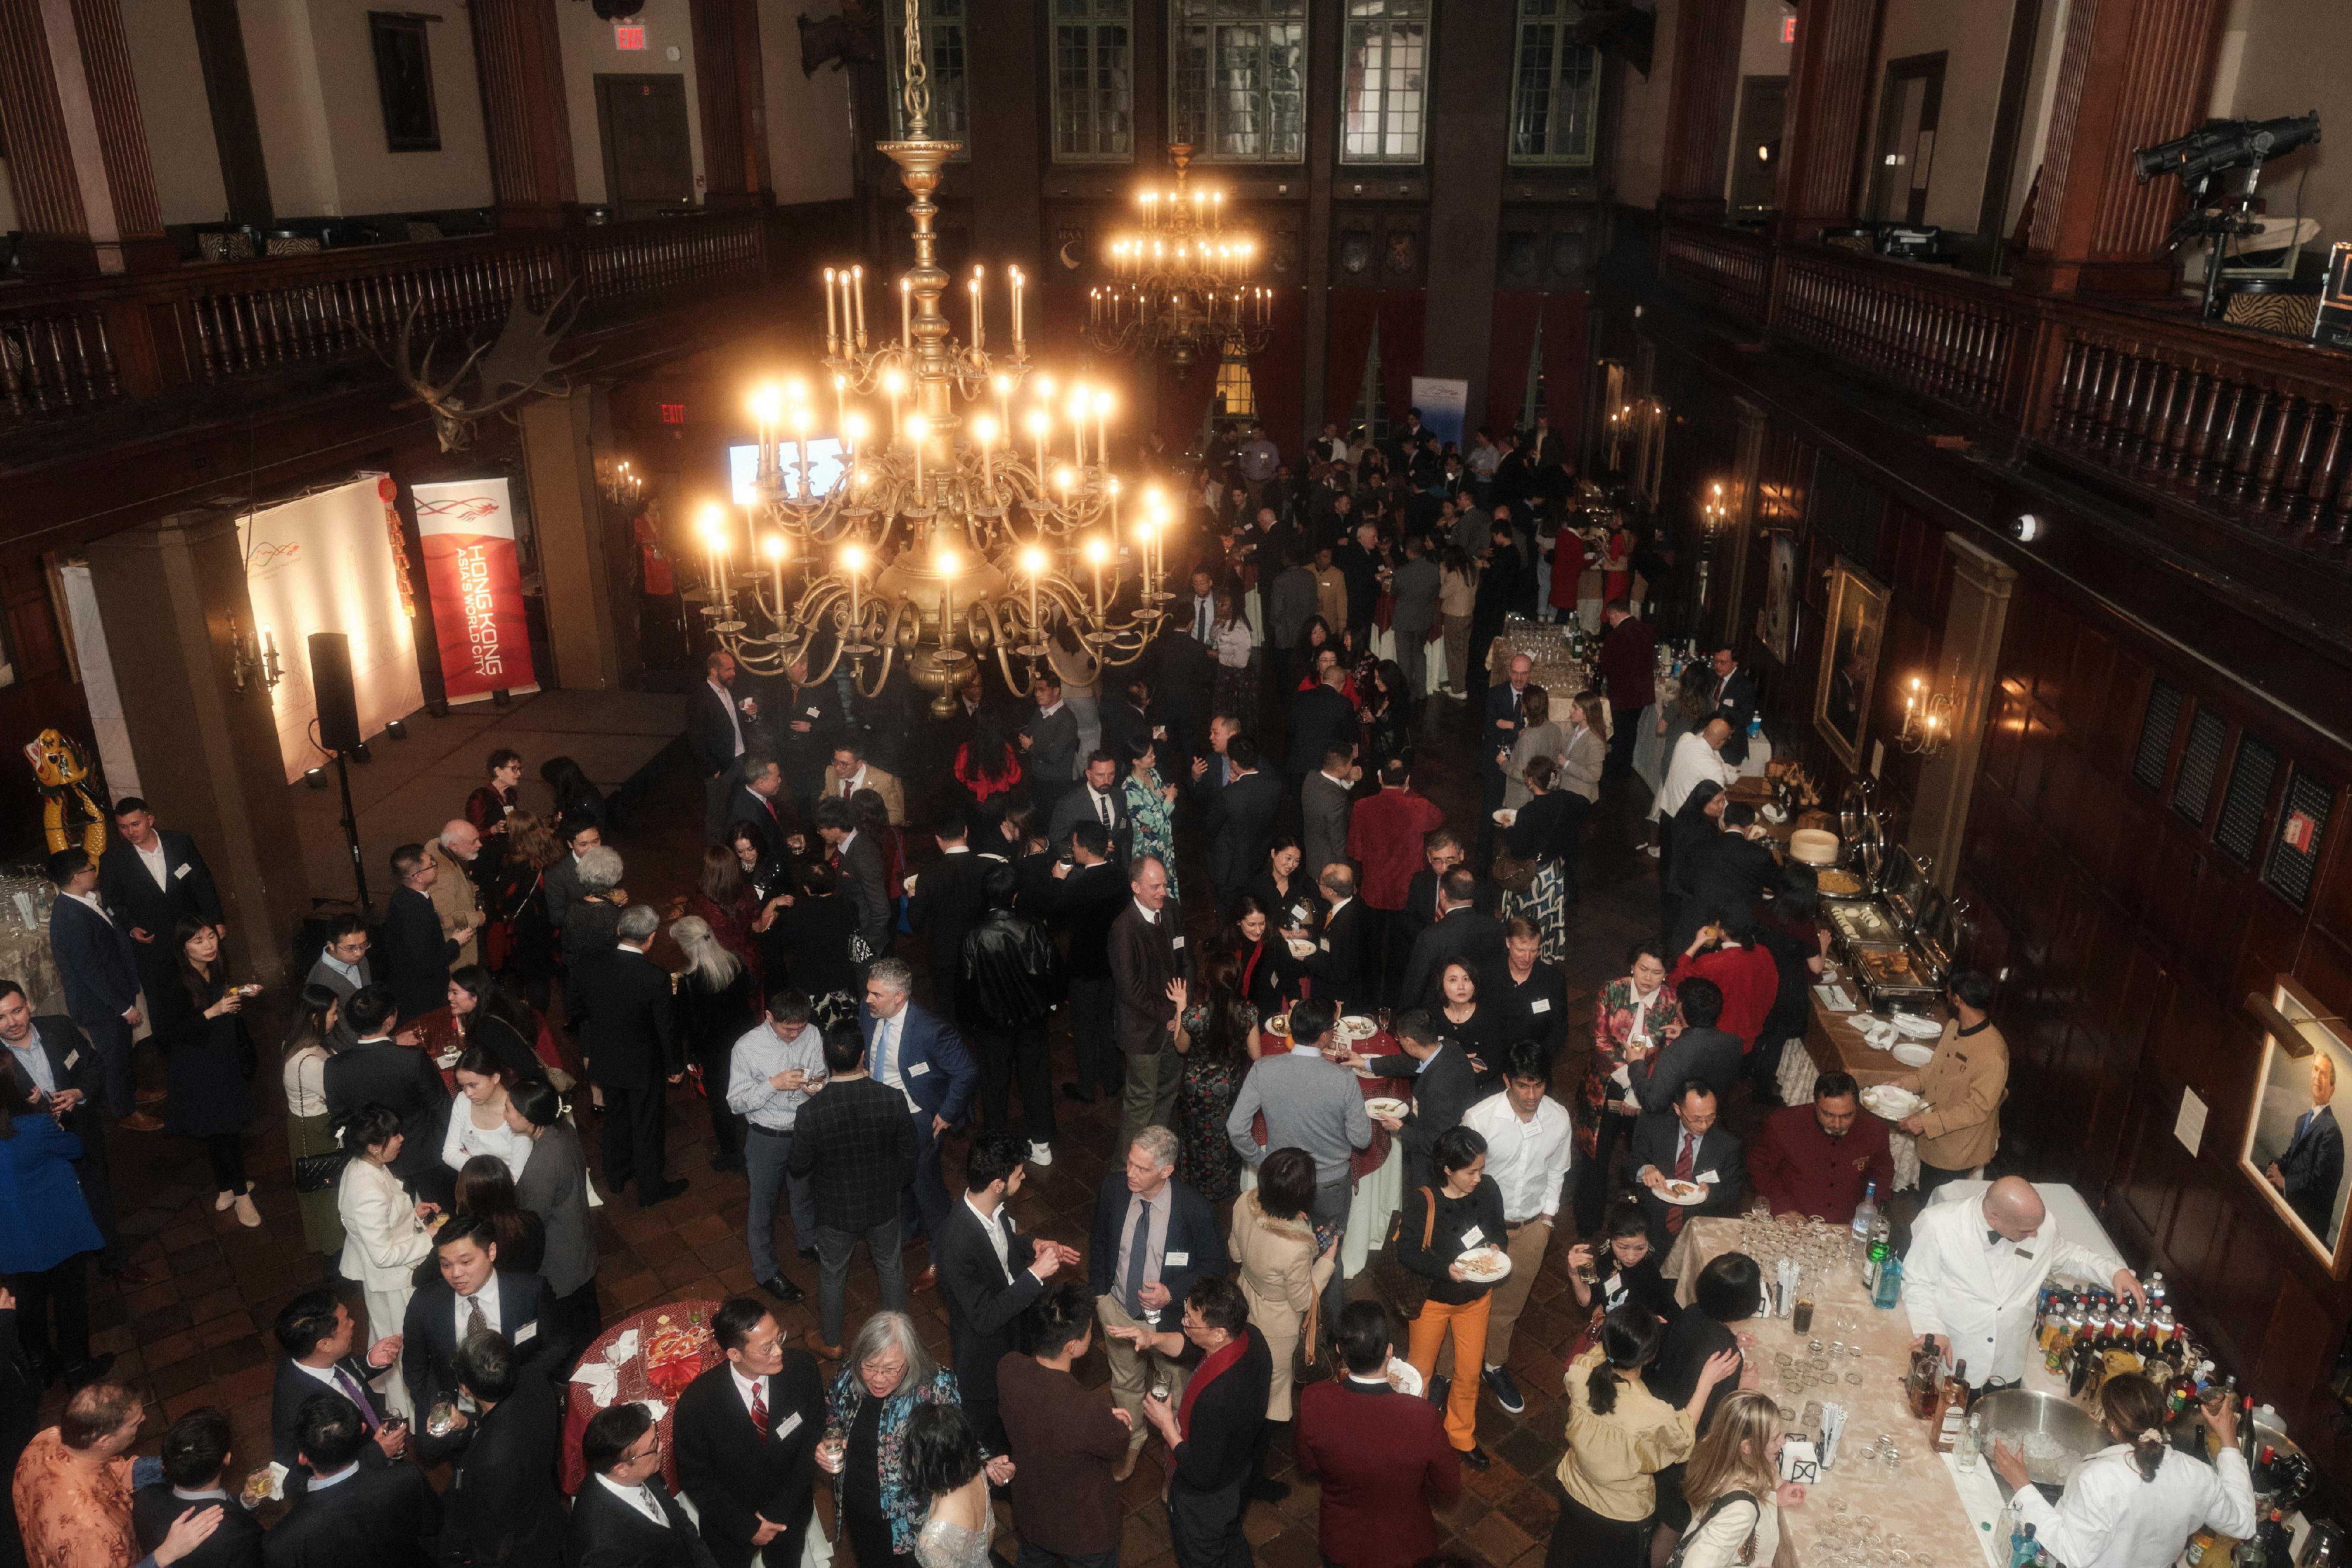 Some 400 guests attended the spring reception hosted by the Hong Kong Economic and Trade Office in New York on February 15 (New York time) to celebrate the Year of the Dragon.